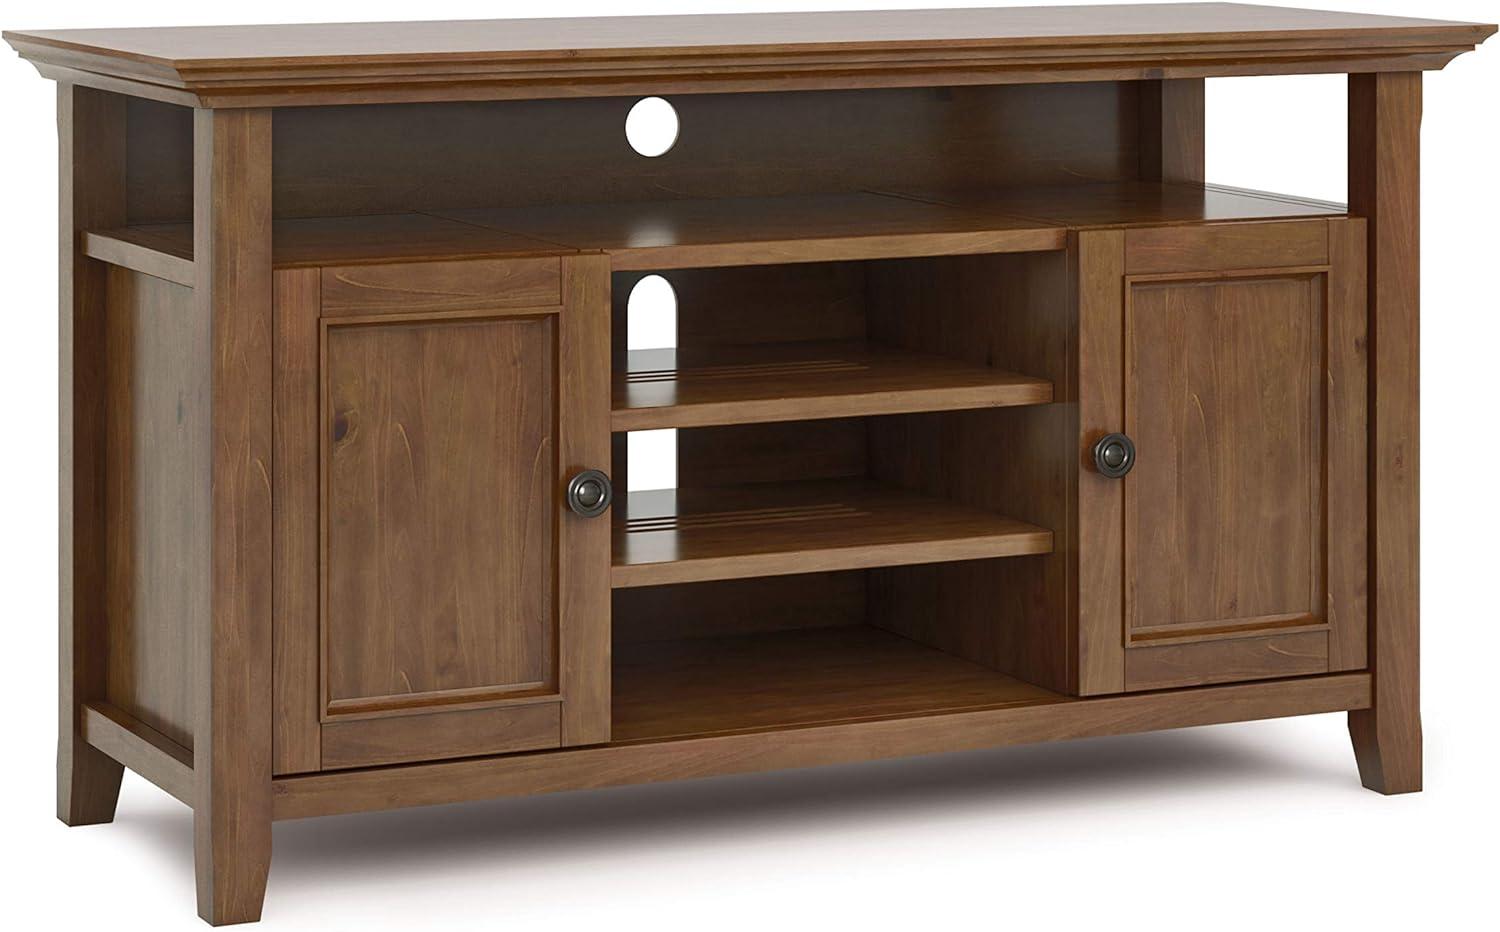 Amherst Transitional 54" Media Stand with Cabinet in Medium Saddle Brown